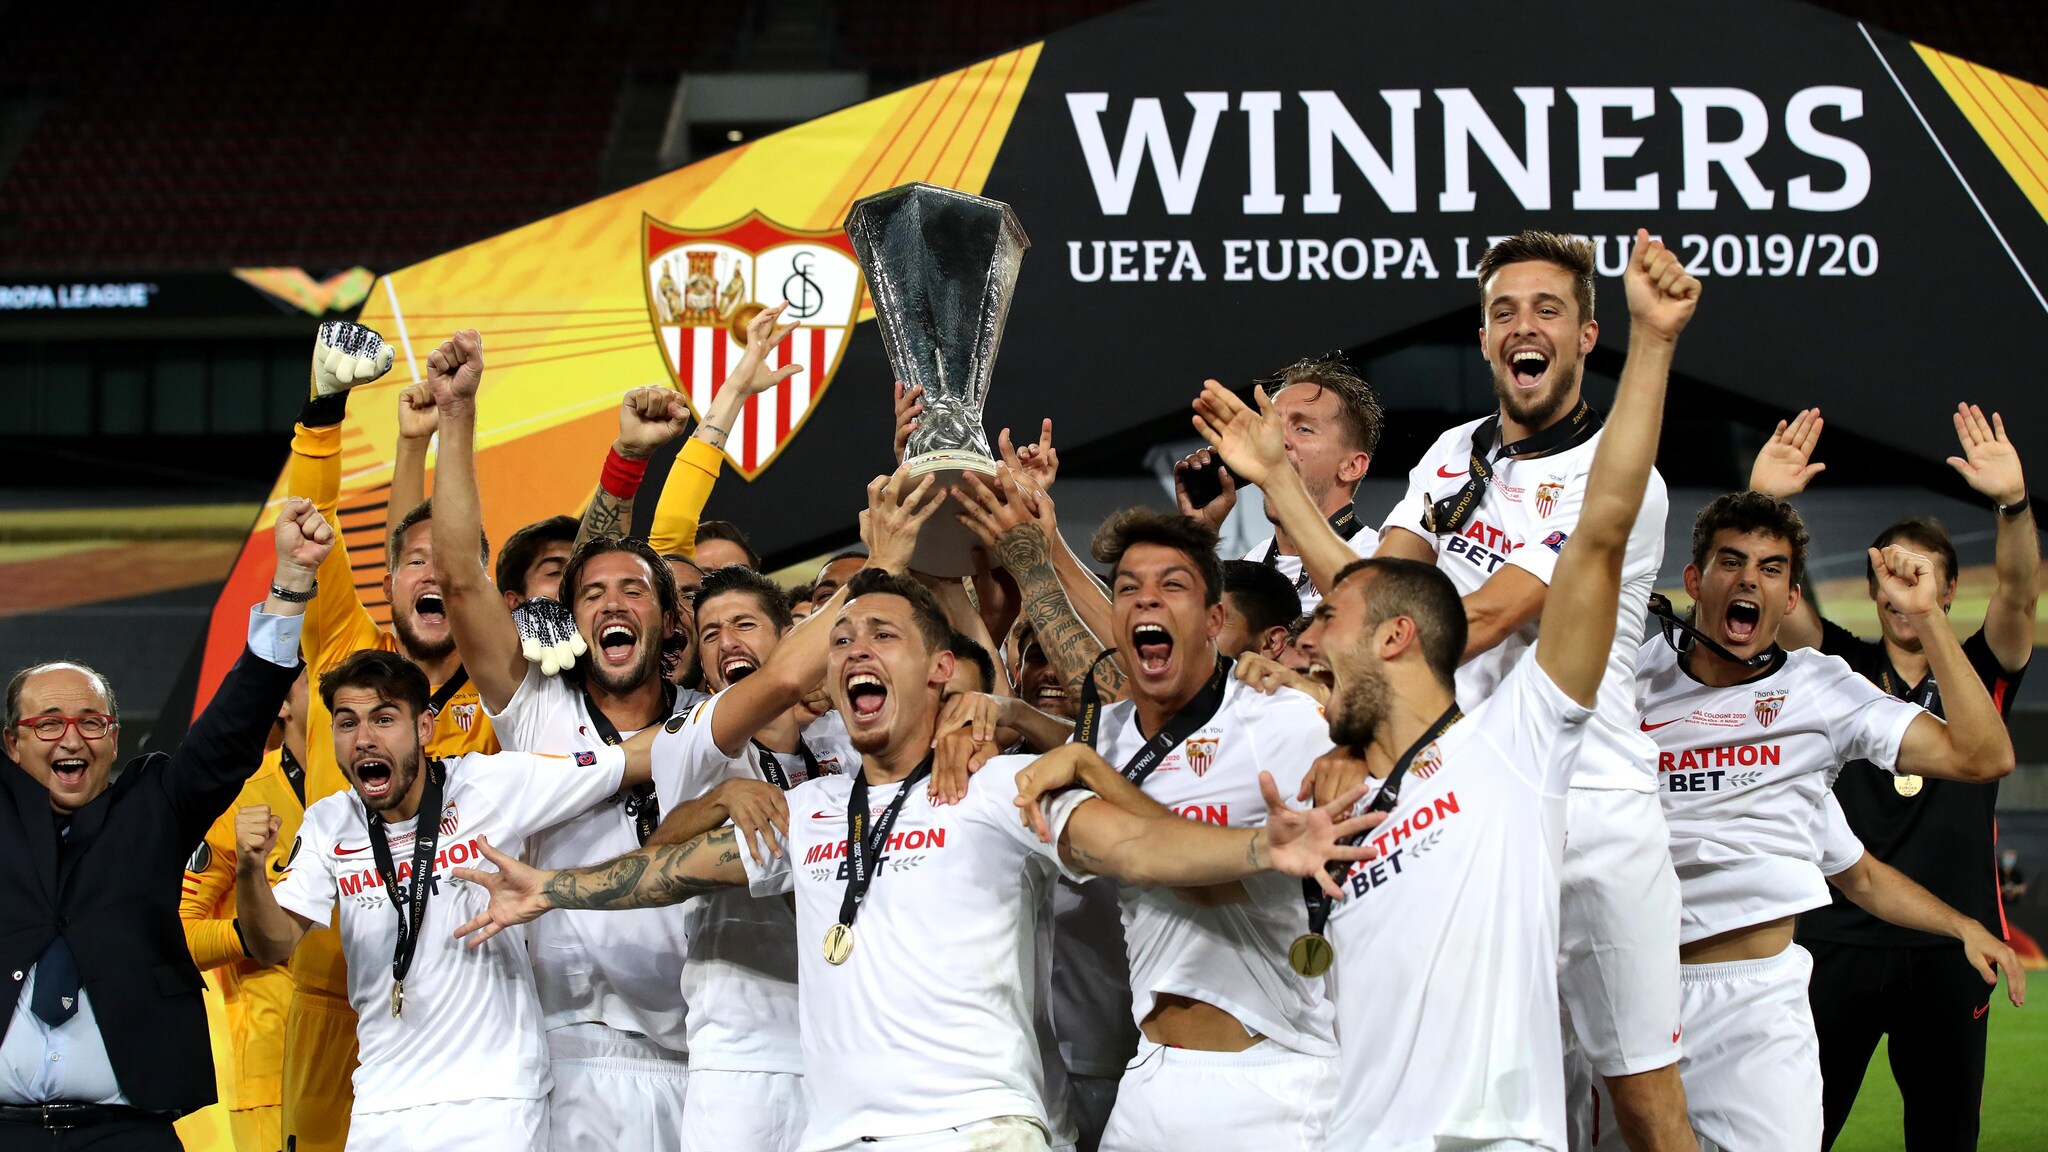 Ли уефа. 2020 UEFA Cup and Europa League winners Sevilla. UEFA Europa League winners Sevilla 2016. UEFA Europa League winners Sevilla 2019-20. 2014 UEFA Cup and Europa League winners Sevilla.